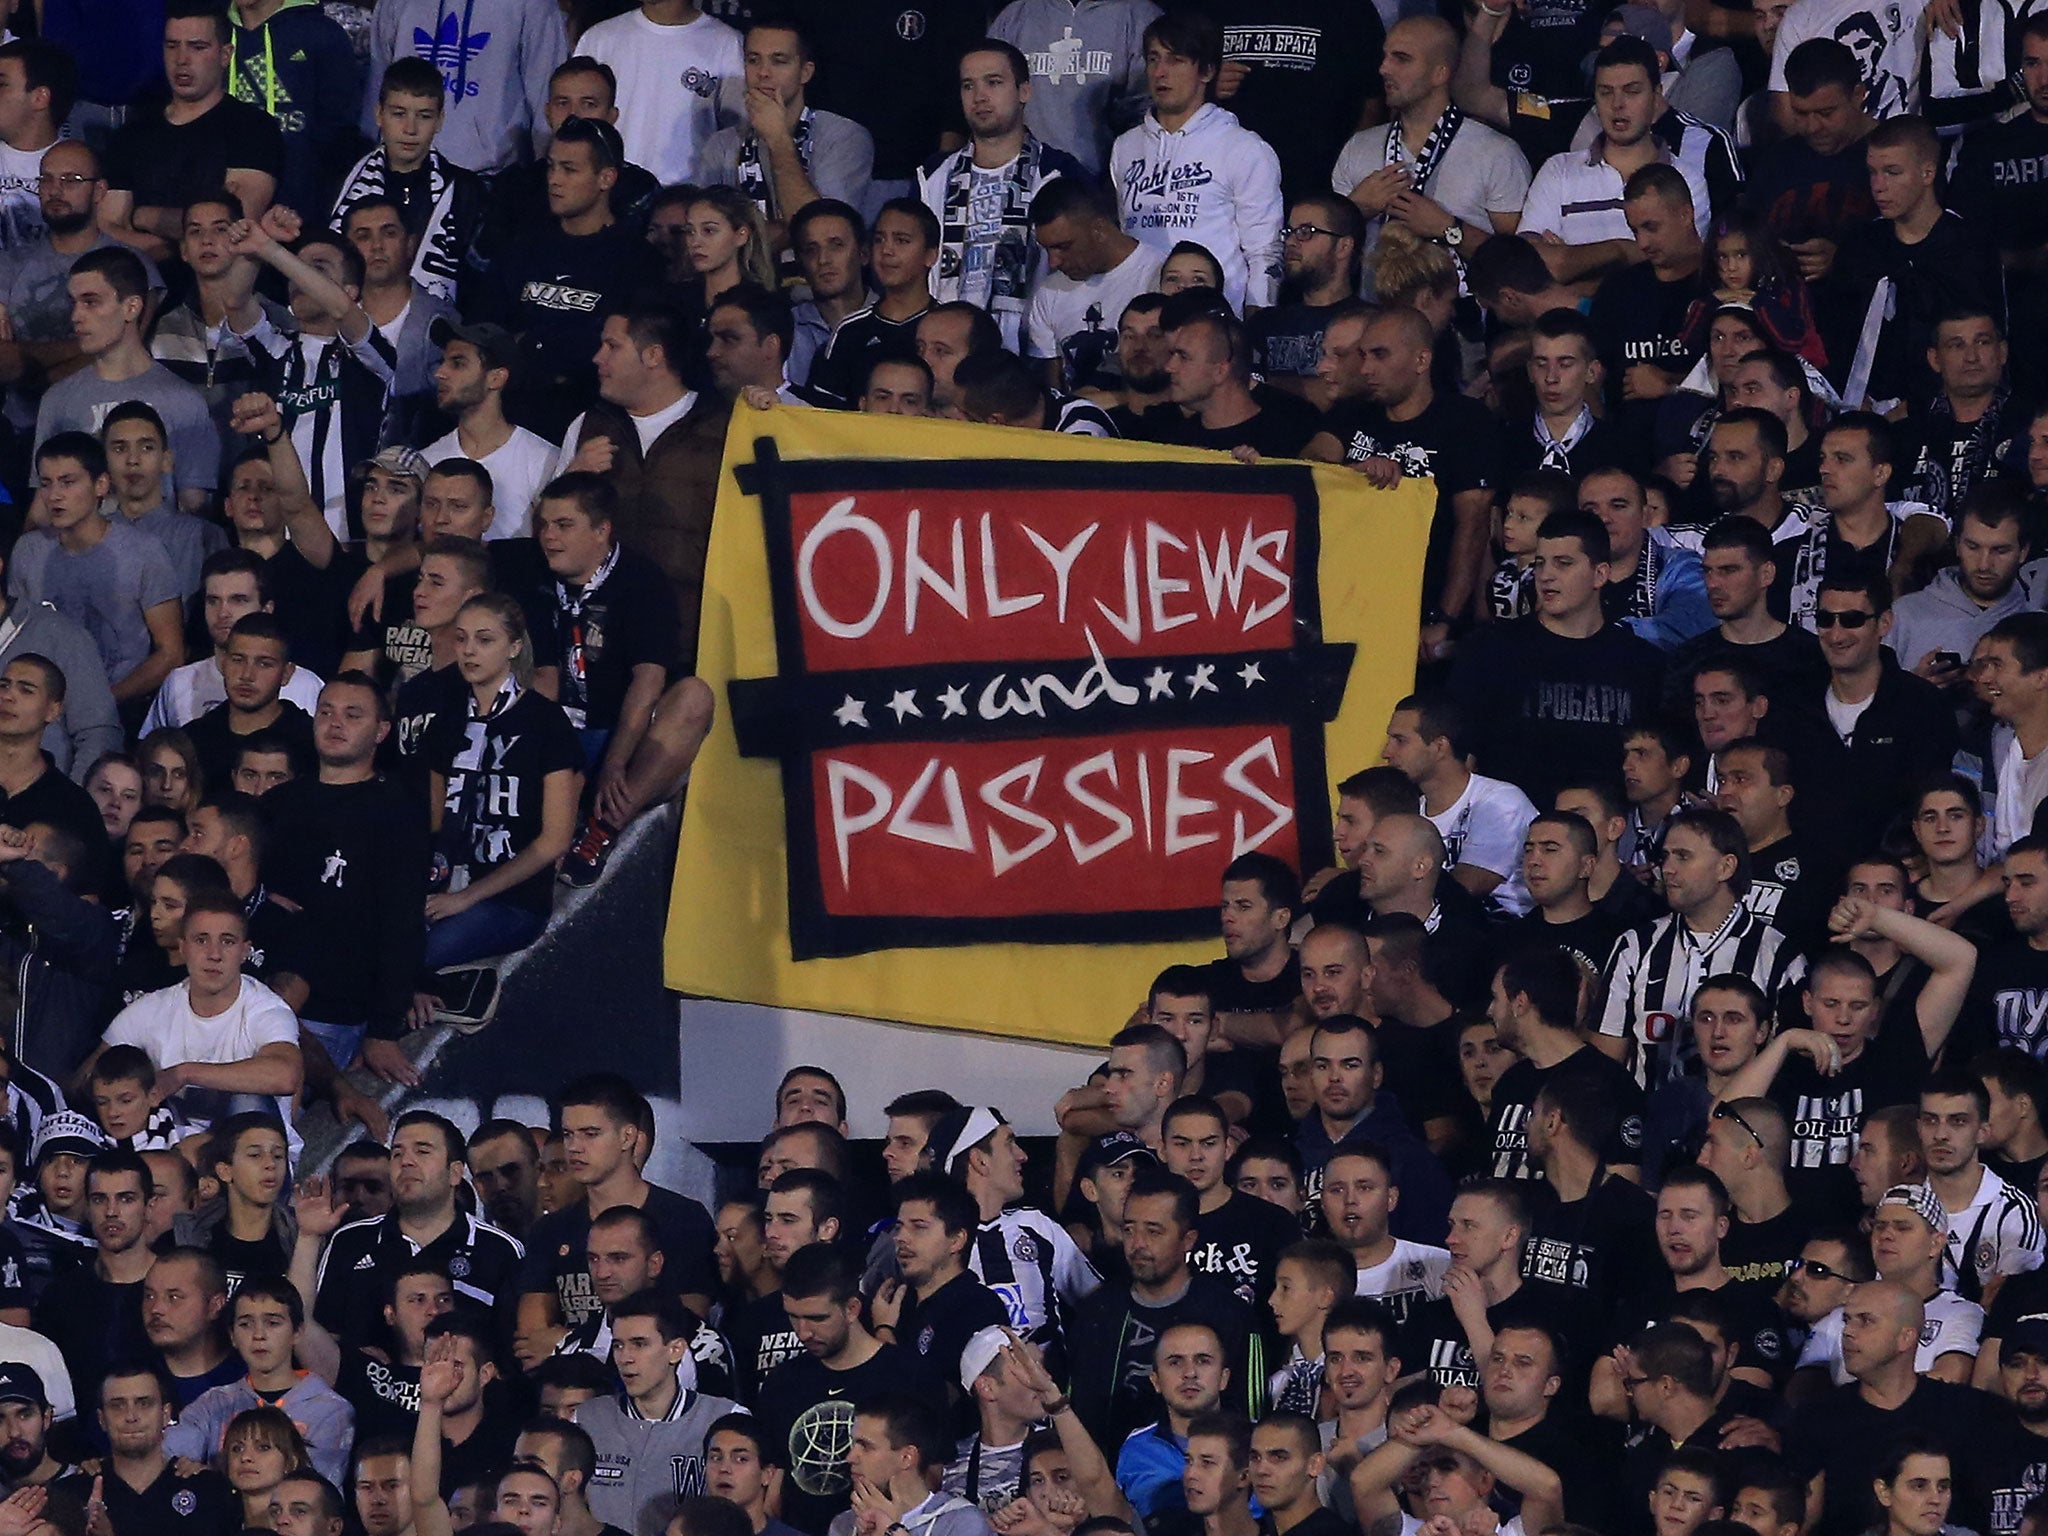 A section of Partizan fans display an anti-semitic banner during the club's Europa League match between Partizan and Tottenham Hotspur